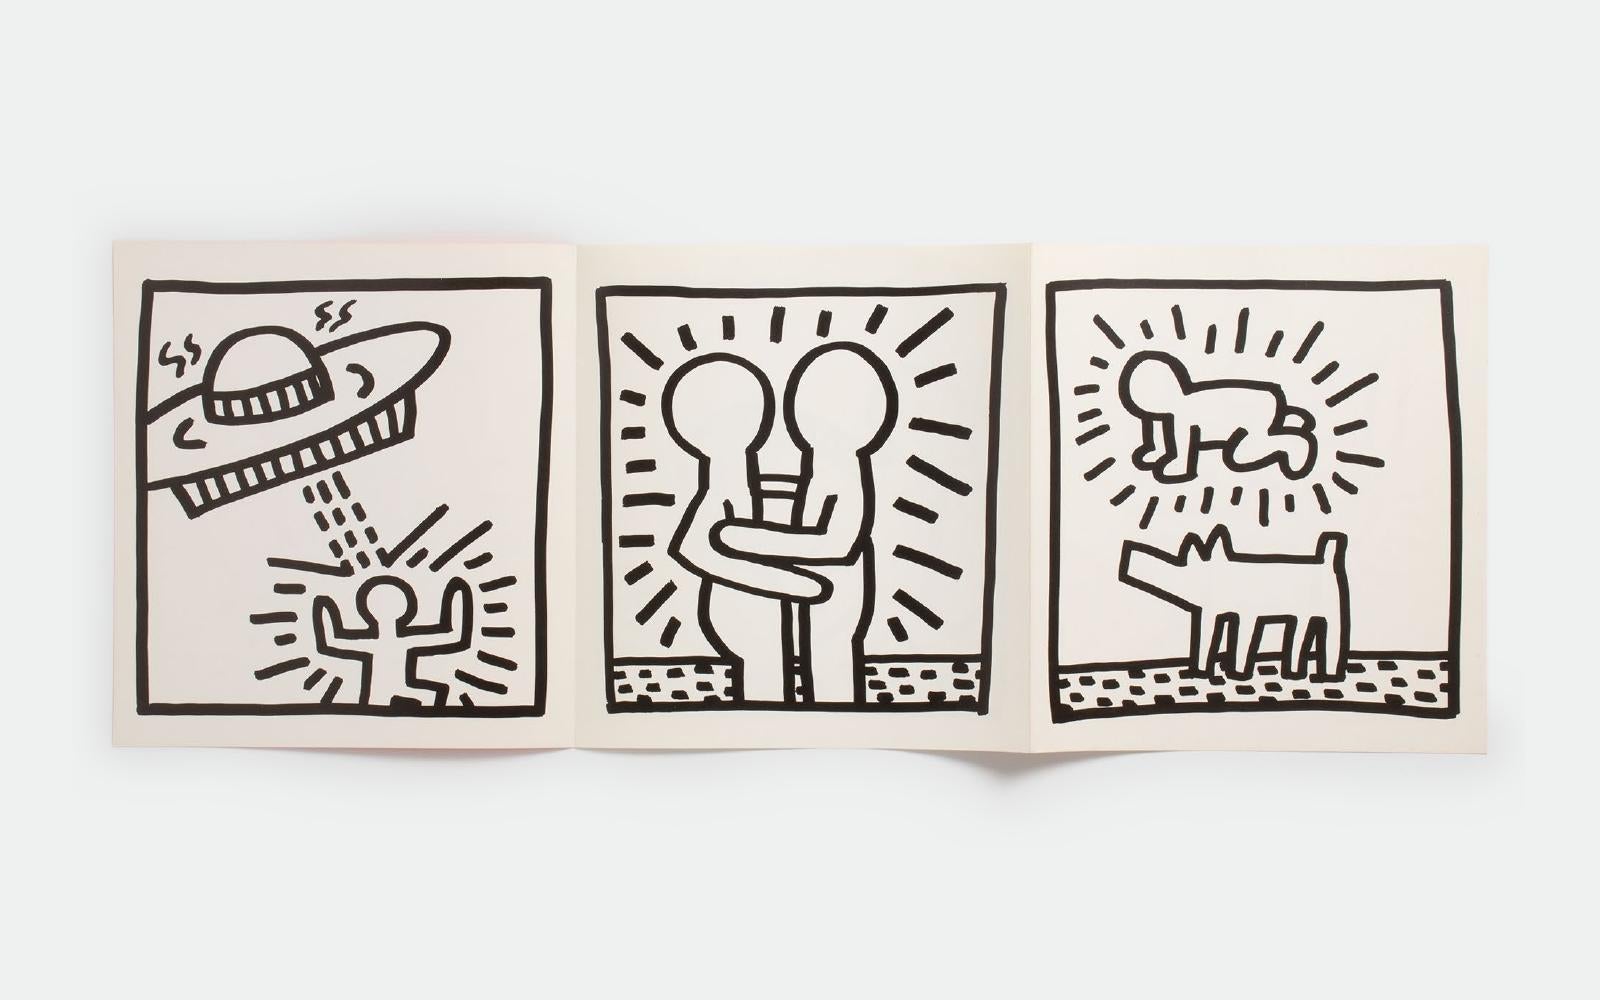 Paul Maenz 1984 catalog & announcement (set of 2) - Pop Art Art by (after) Keith Haring